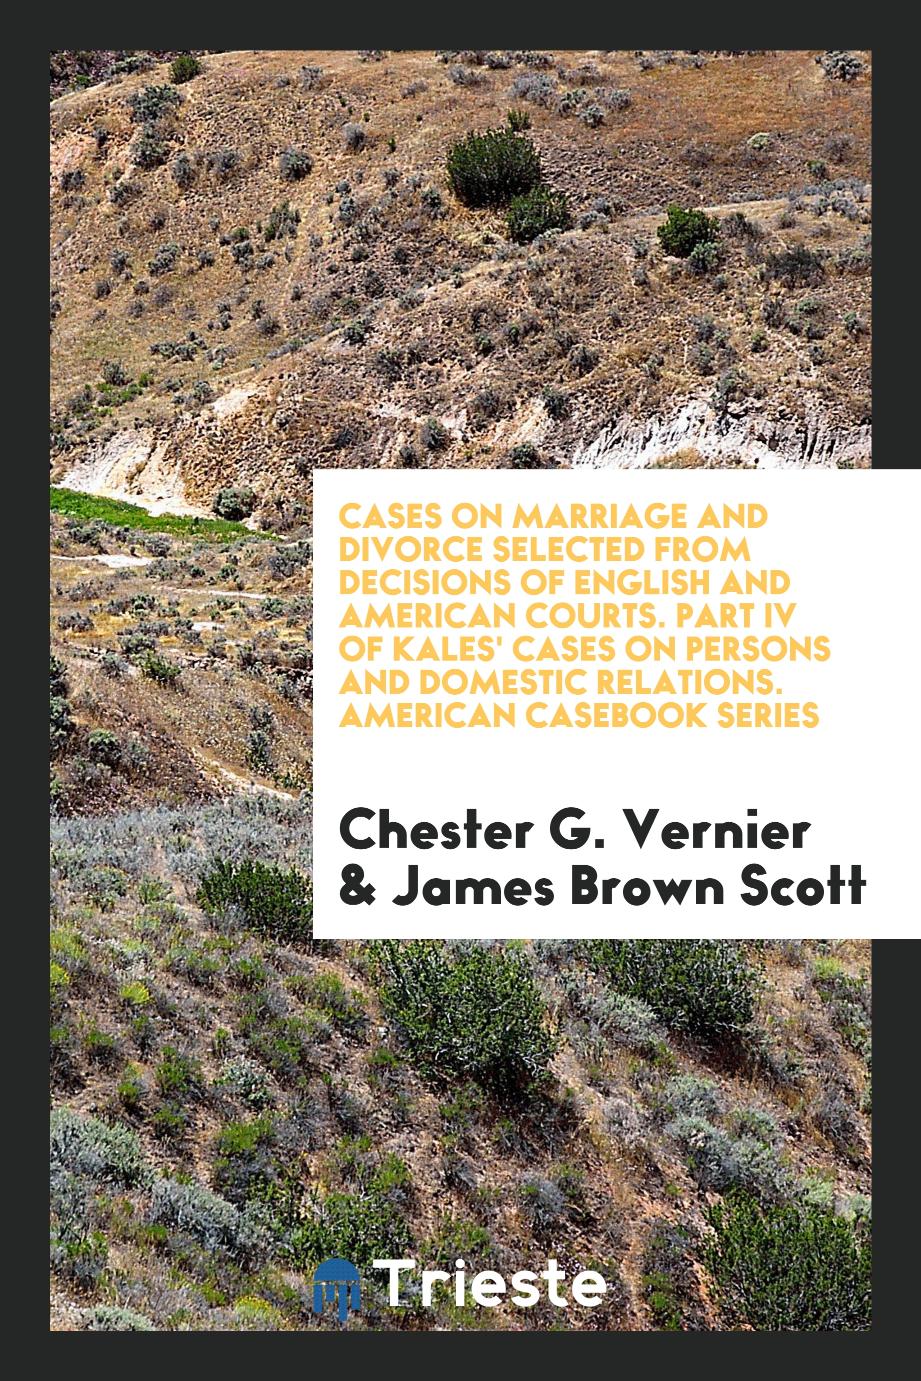 Cases on Marriage and Divorce Selected from Decisions of English and American Courts. Part IV of Kales' Cases on Persons and Domestic Relations. American Casebook Series